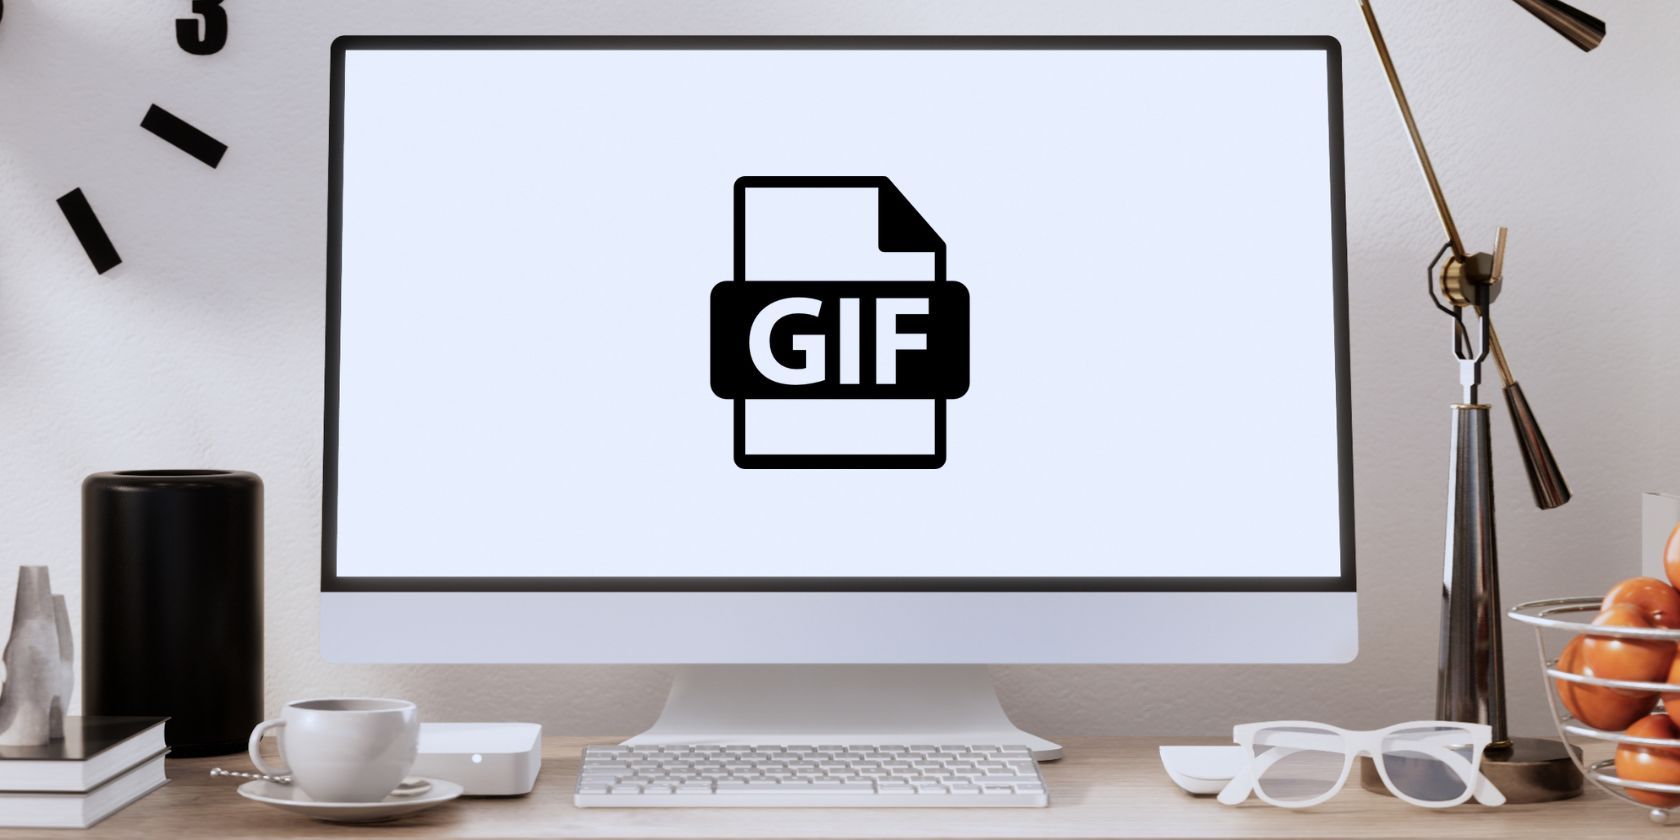 An image of a GIF icon on a Mac monitor